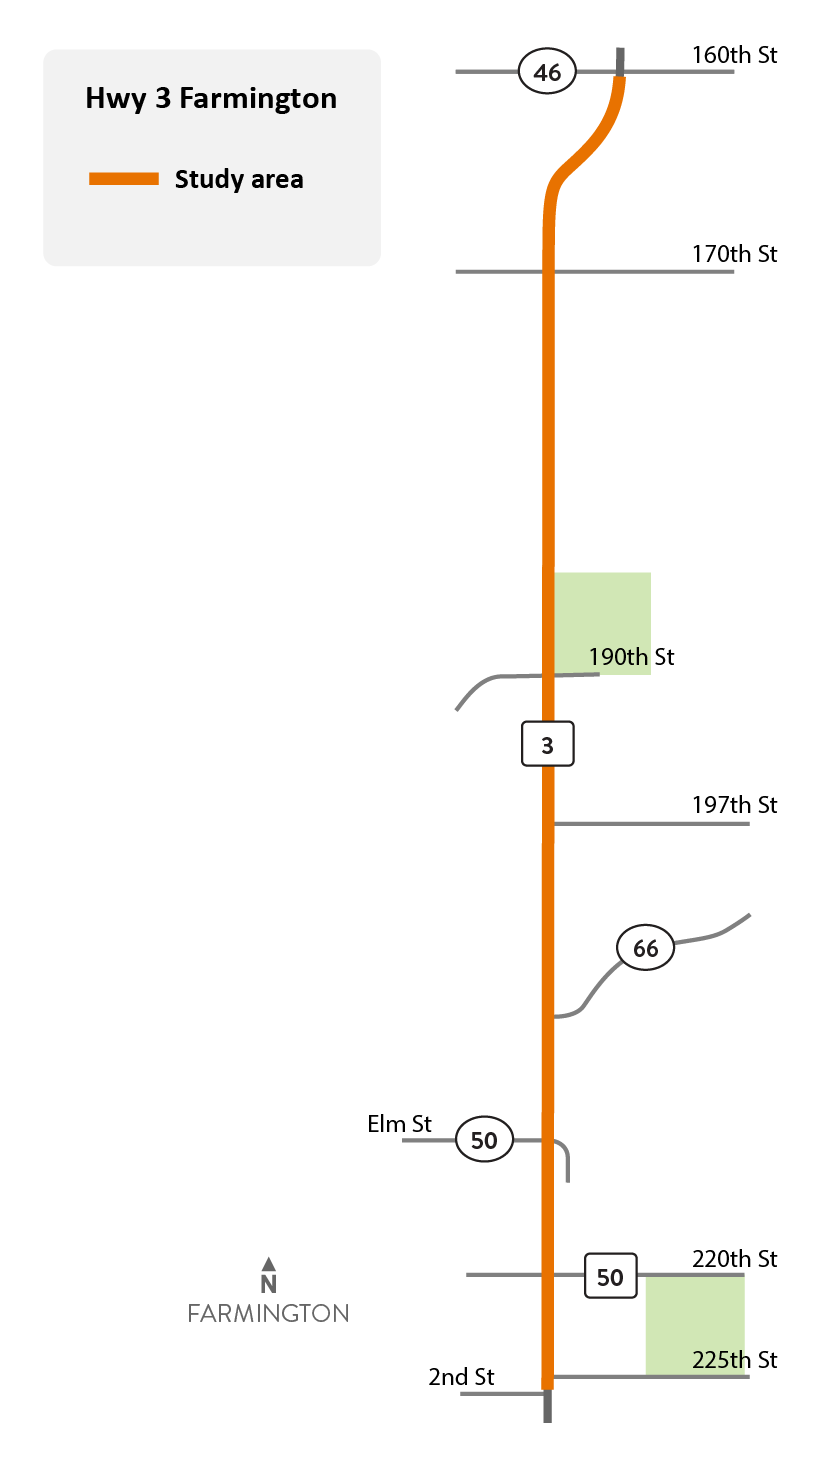 Highway 3 project area map from Rosemount to Farmington